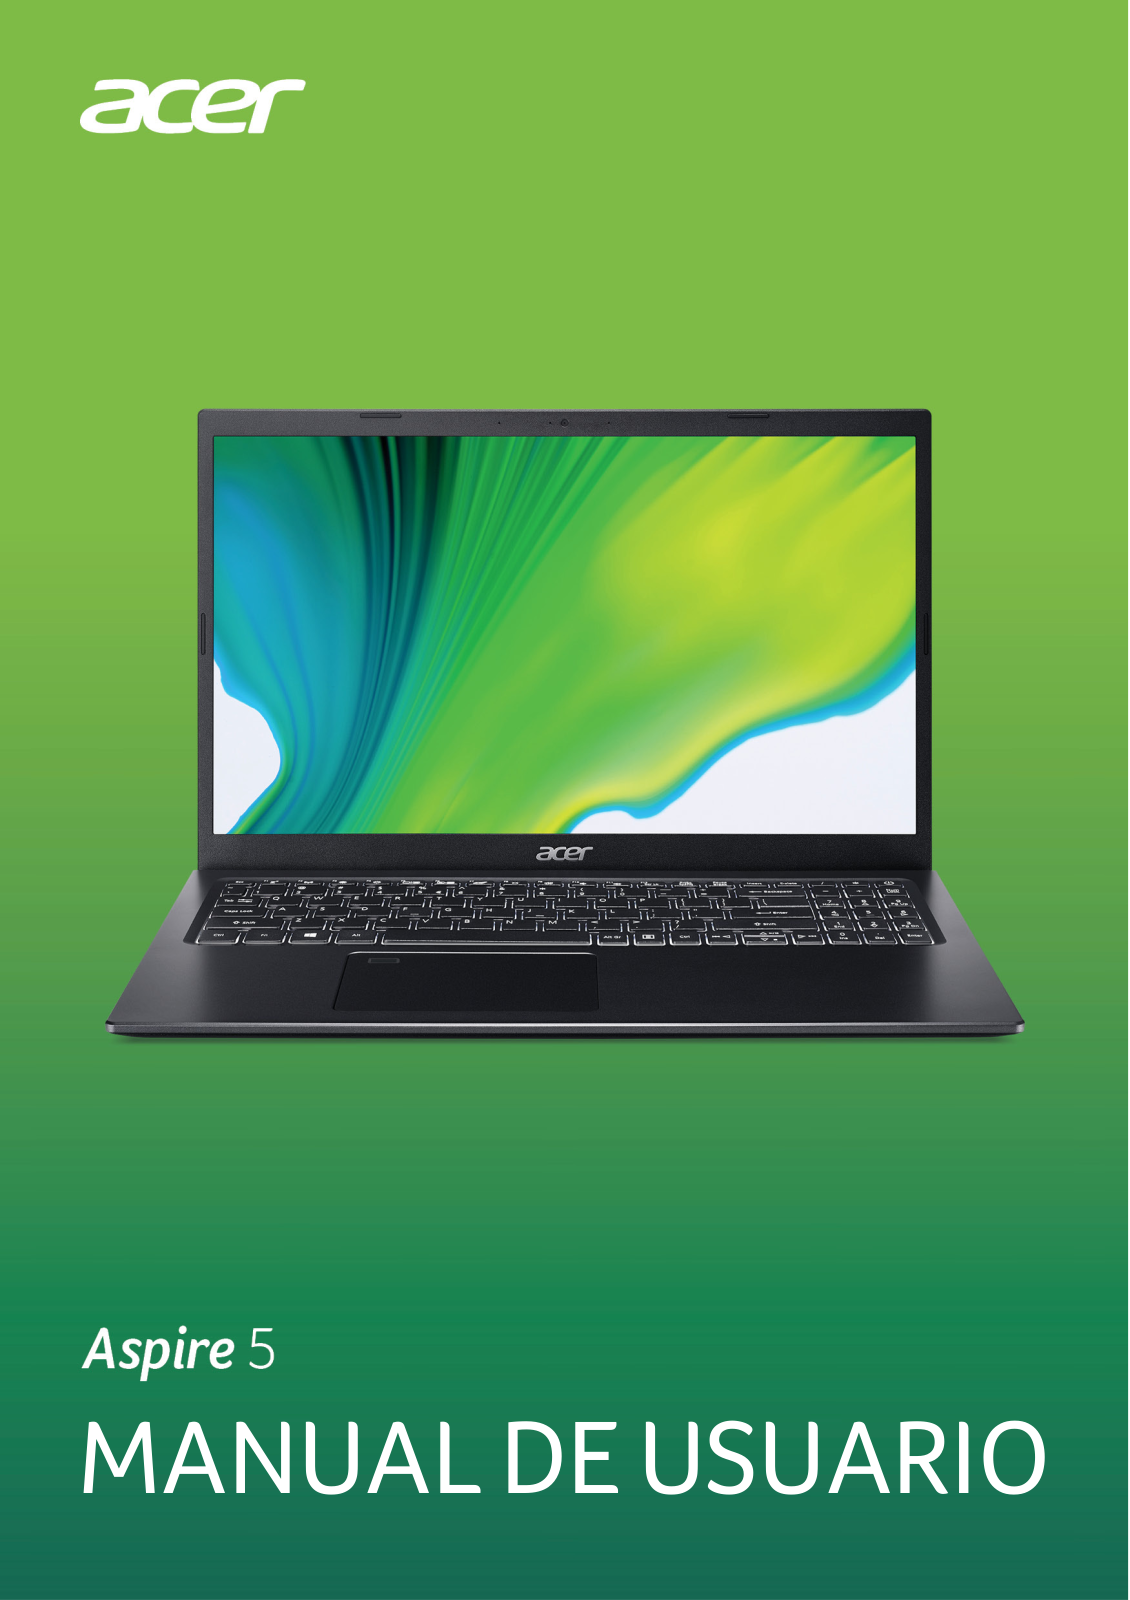 Acer Aspire 5, A515-56, A515-56G, A515-56S User Manual